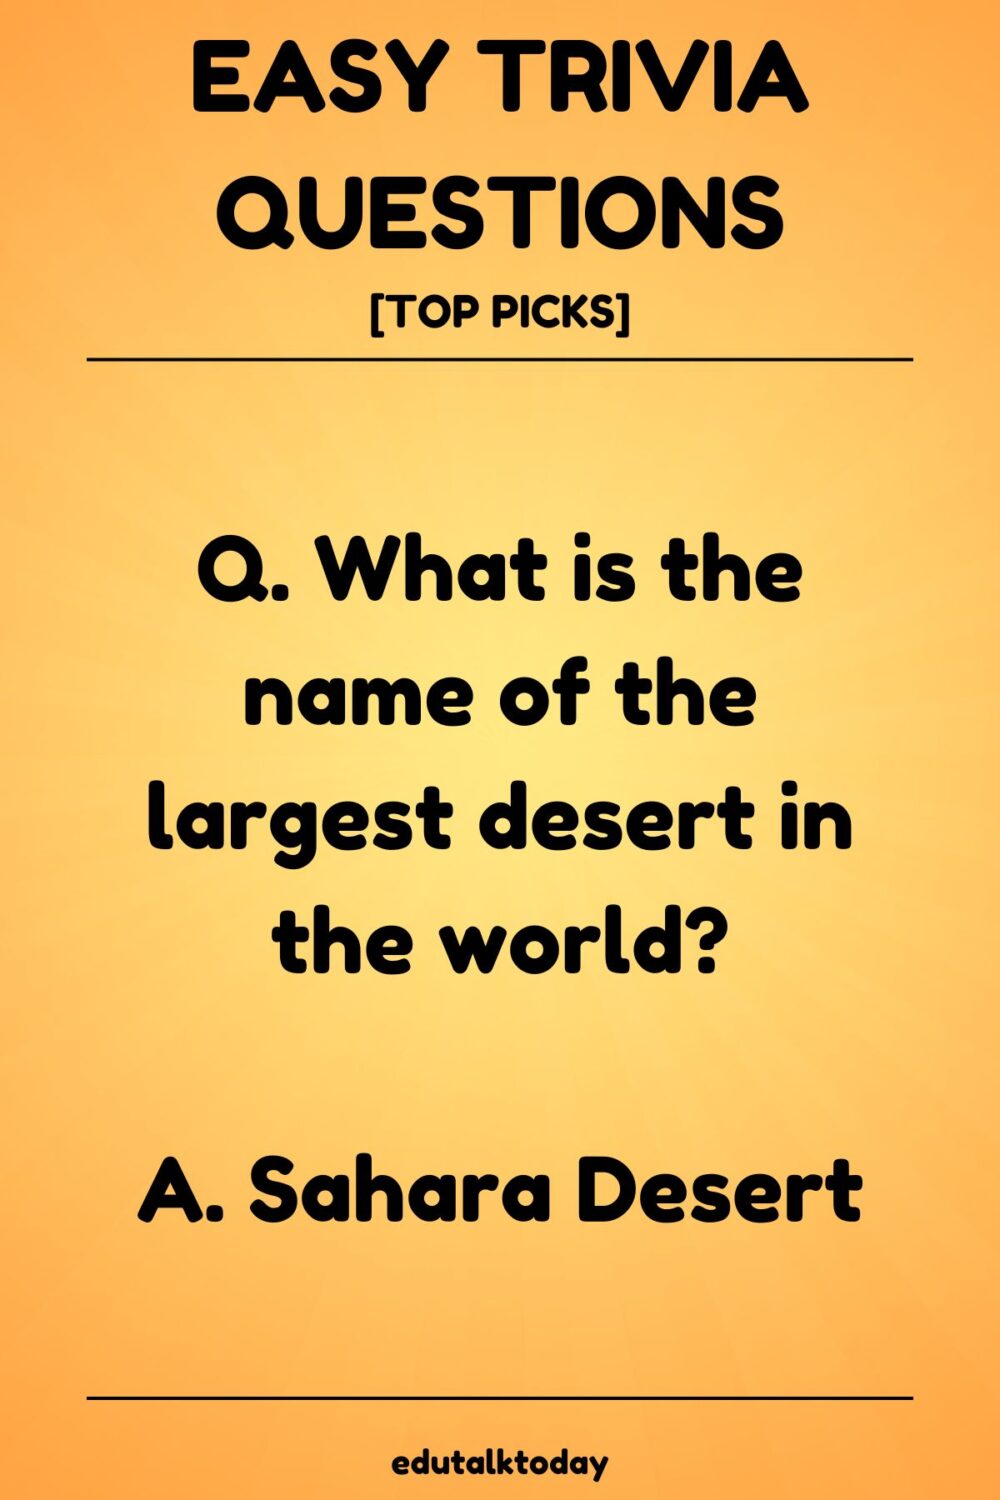 52 Easy Trivia Questions For a Perfect Debut